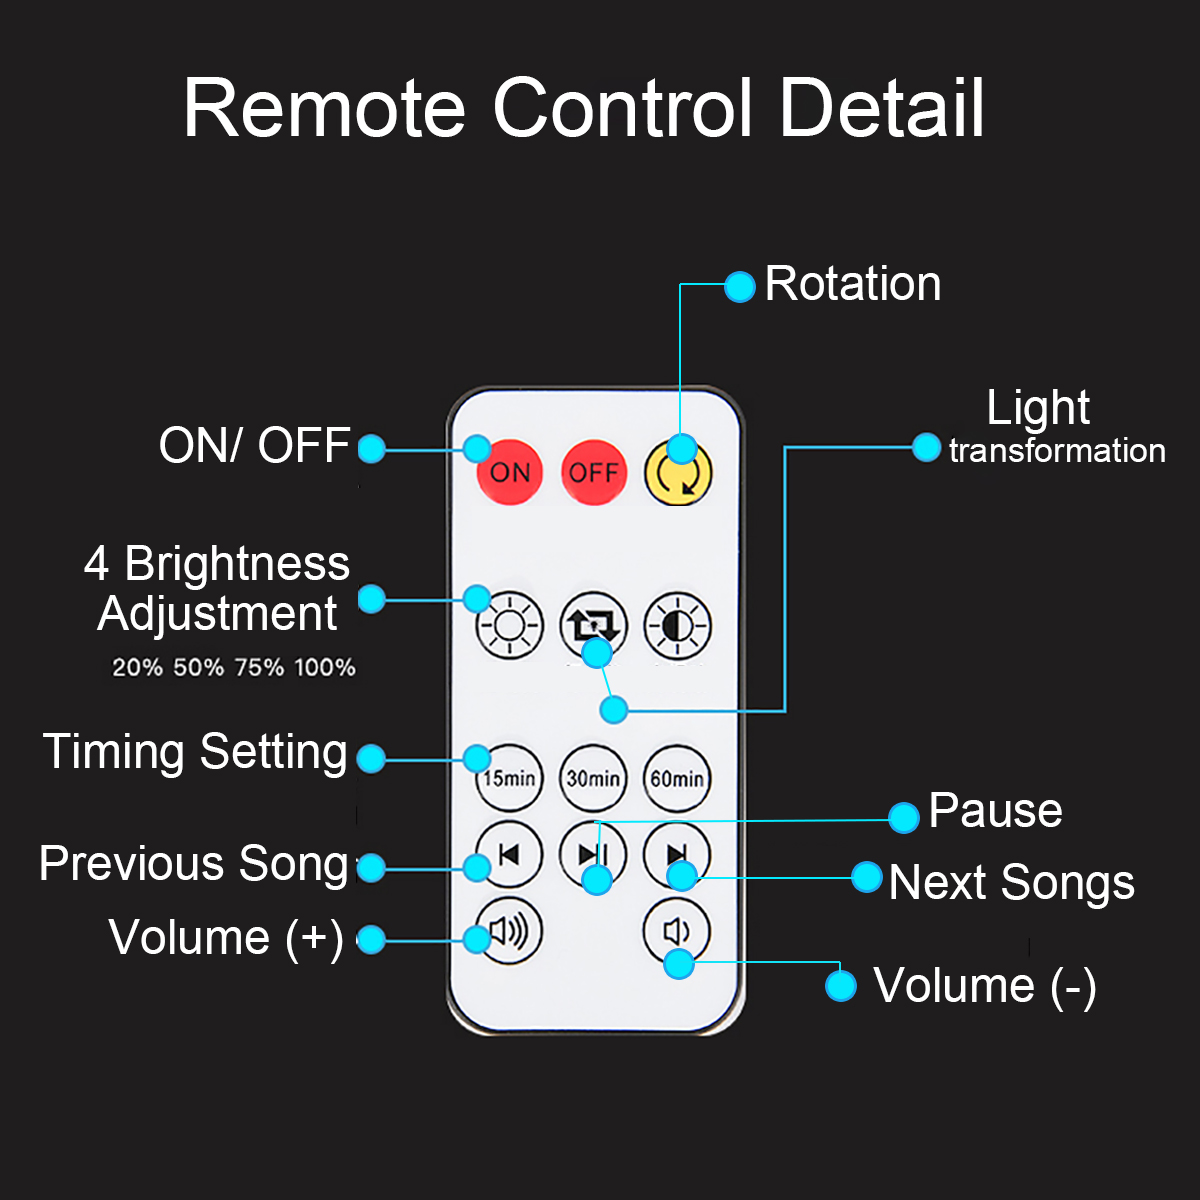 Music bluetooth Remote Control Night Sky Light LED Lamp For Smart Home